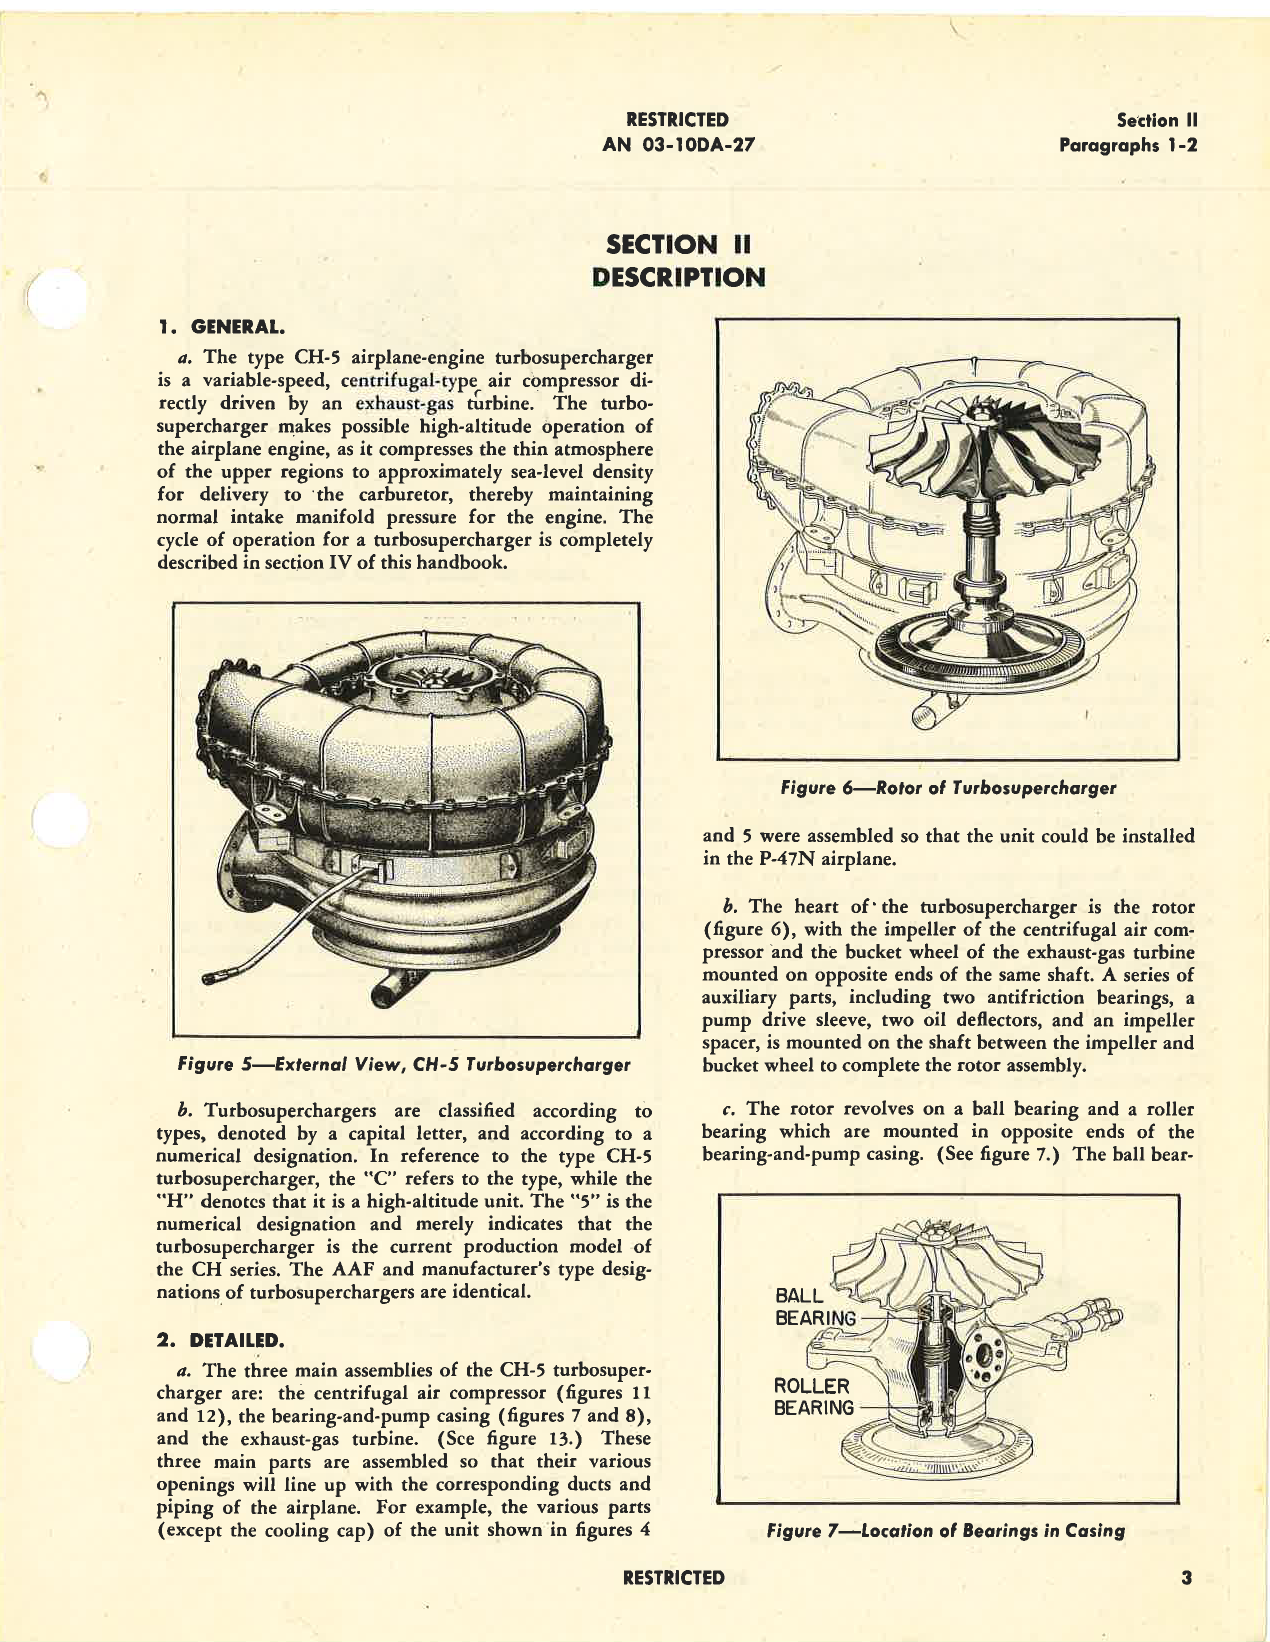 Sample page 7 from AirCorps Library document: Handbook of Instructions with Parts Catalog for Type CH-5 Turbosupercharger